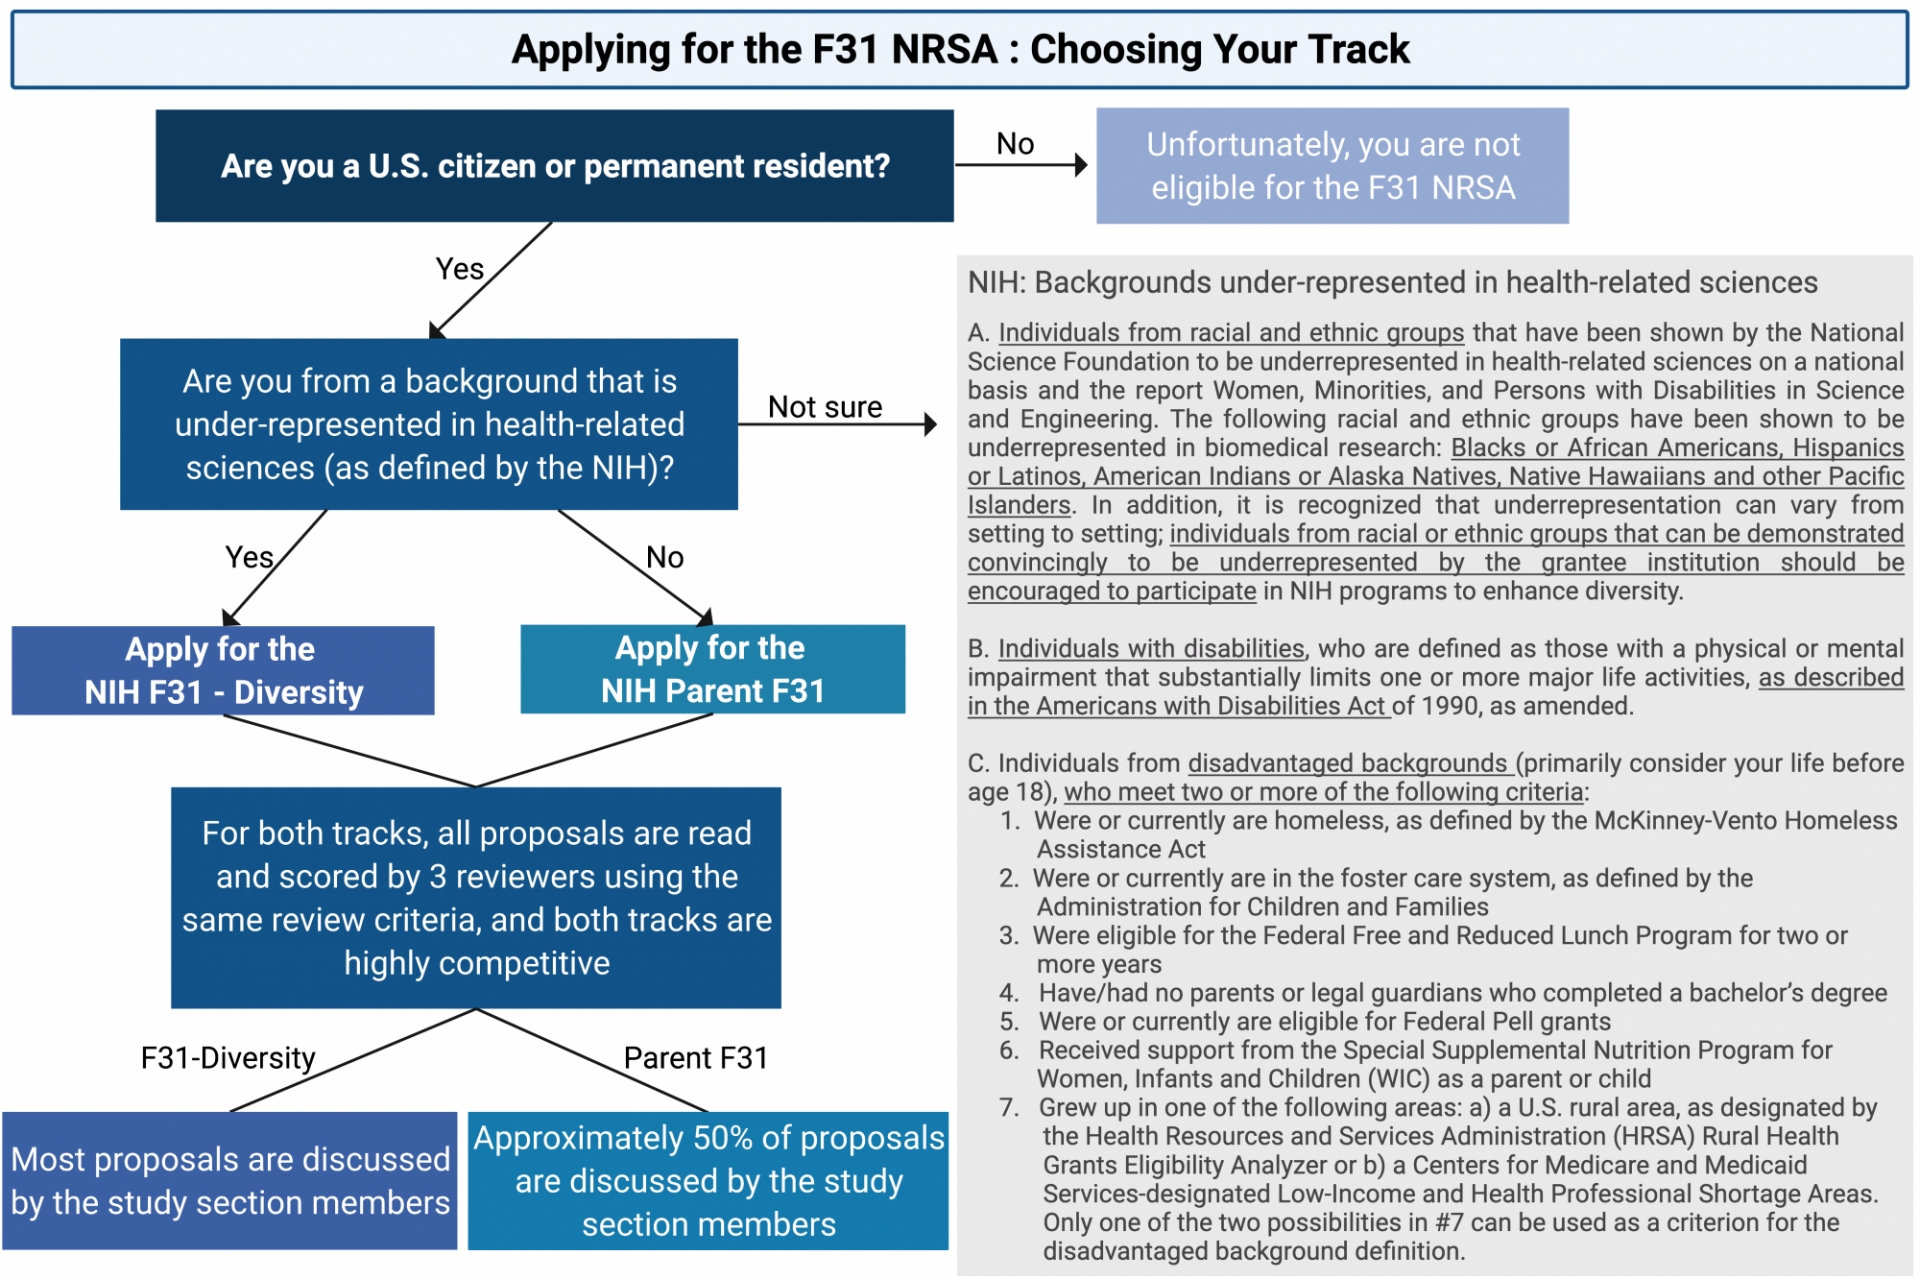 F31 - Choosing your track graphic: Shows a decision tree for applying through the Parent F31 or the F31-Diversity track. If the applicant identifies as a student from a background under-represented in the health sciences using NIH's criteria, they qualify for the F31-Diversity track.